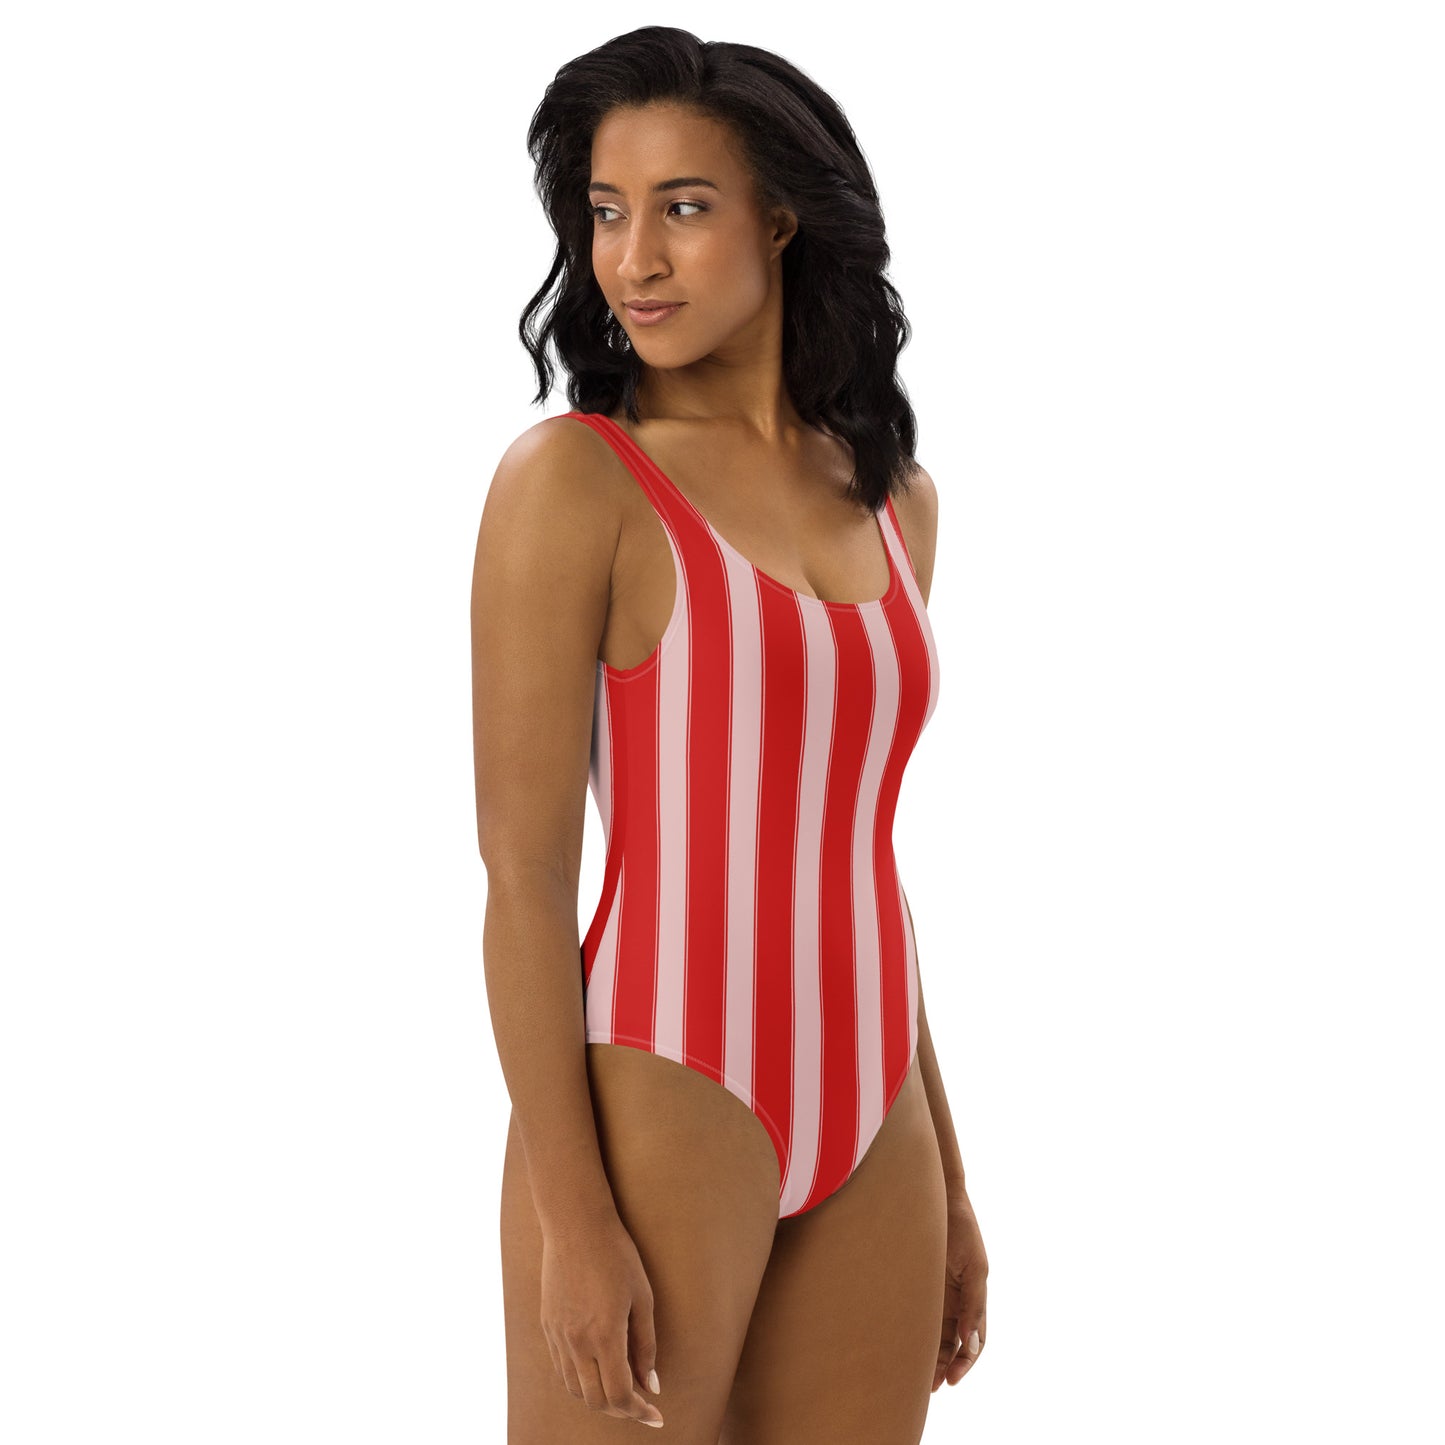 Striped One-Piece Swimsuit In PInk and Red